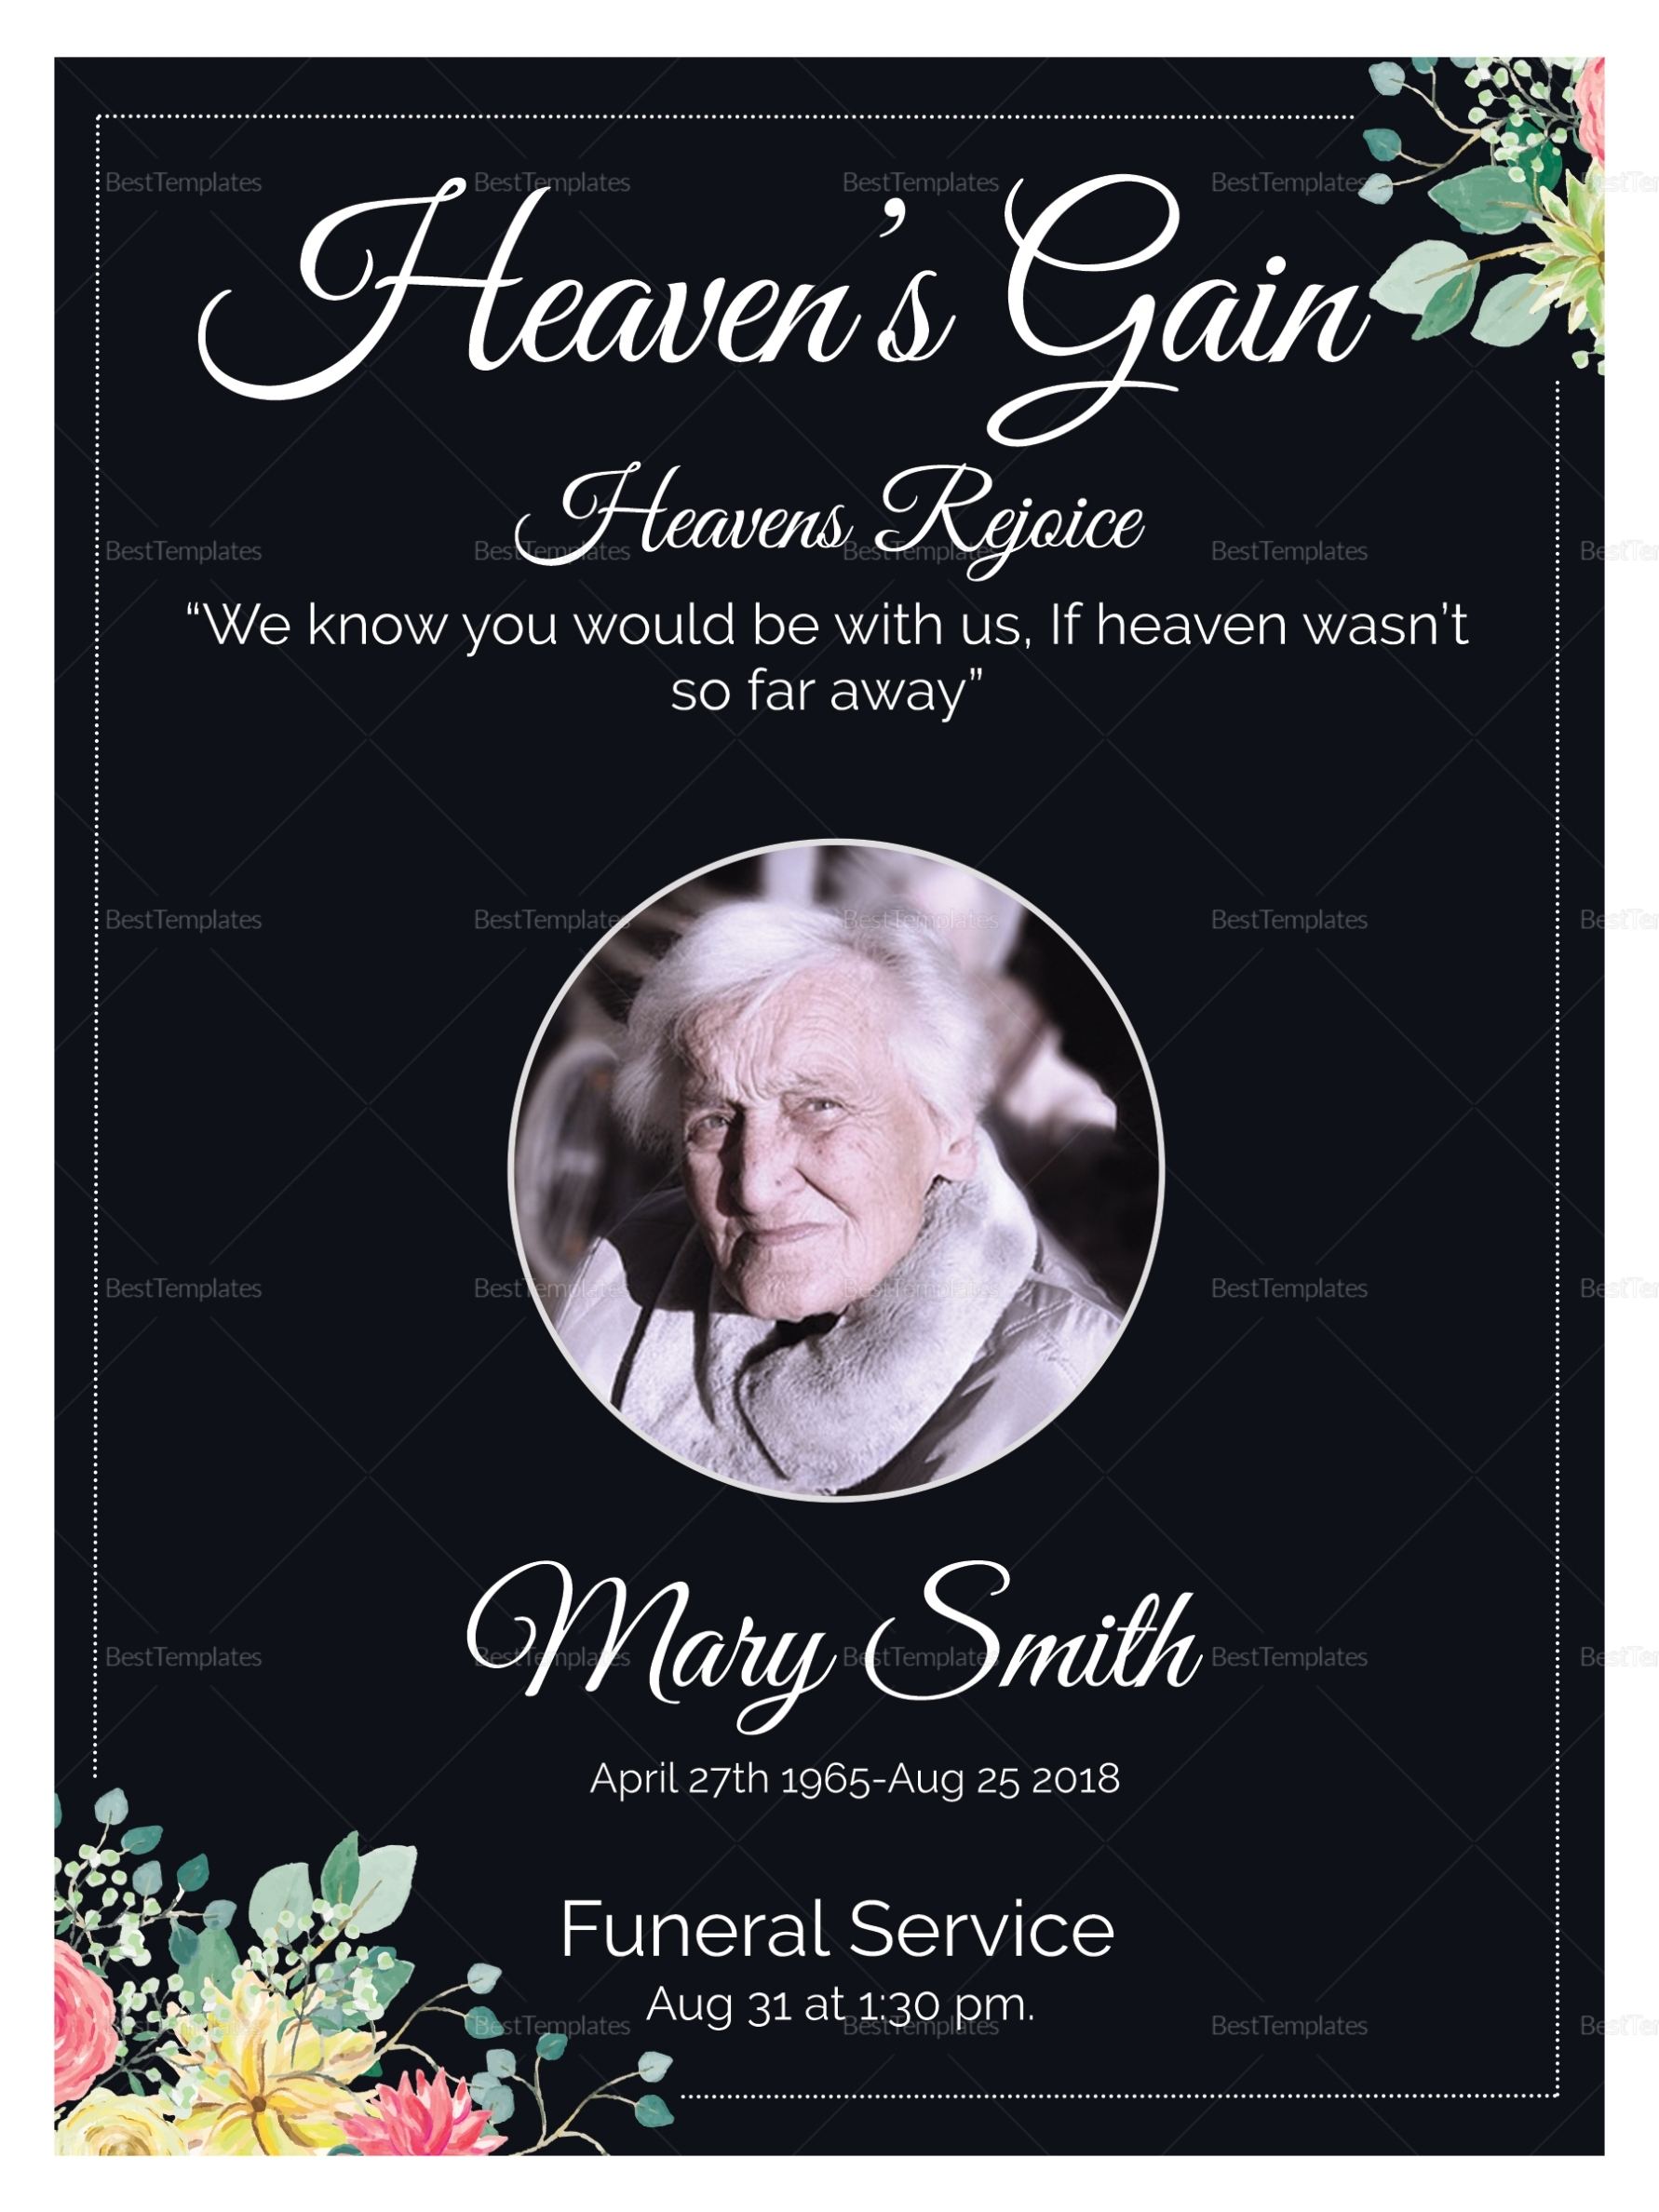 Eulogy Funeral Invitation Card Design Template In Word, Psd, Publisher throughout Death Anniversary Cards Templates